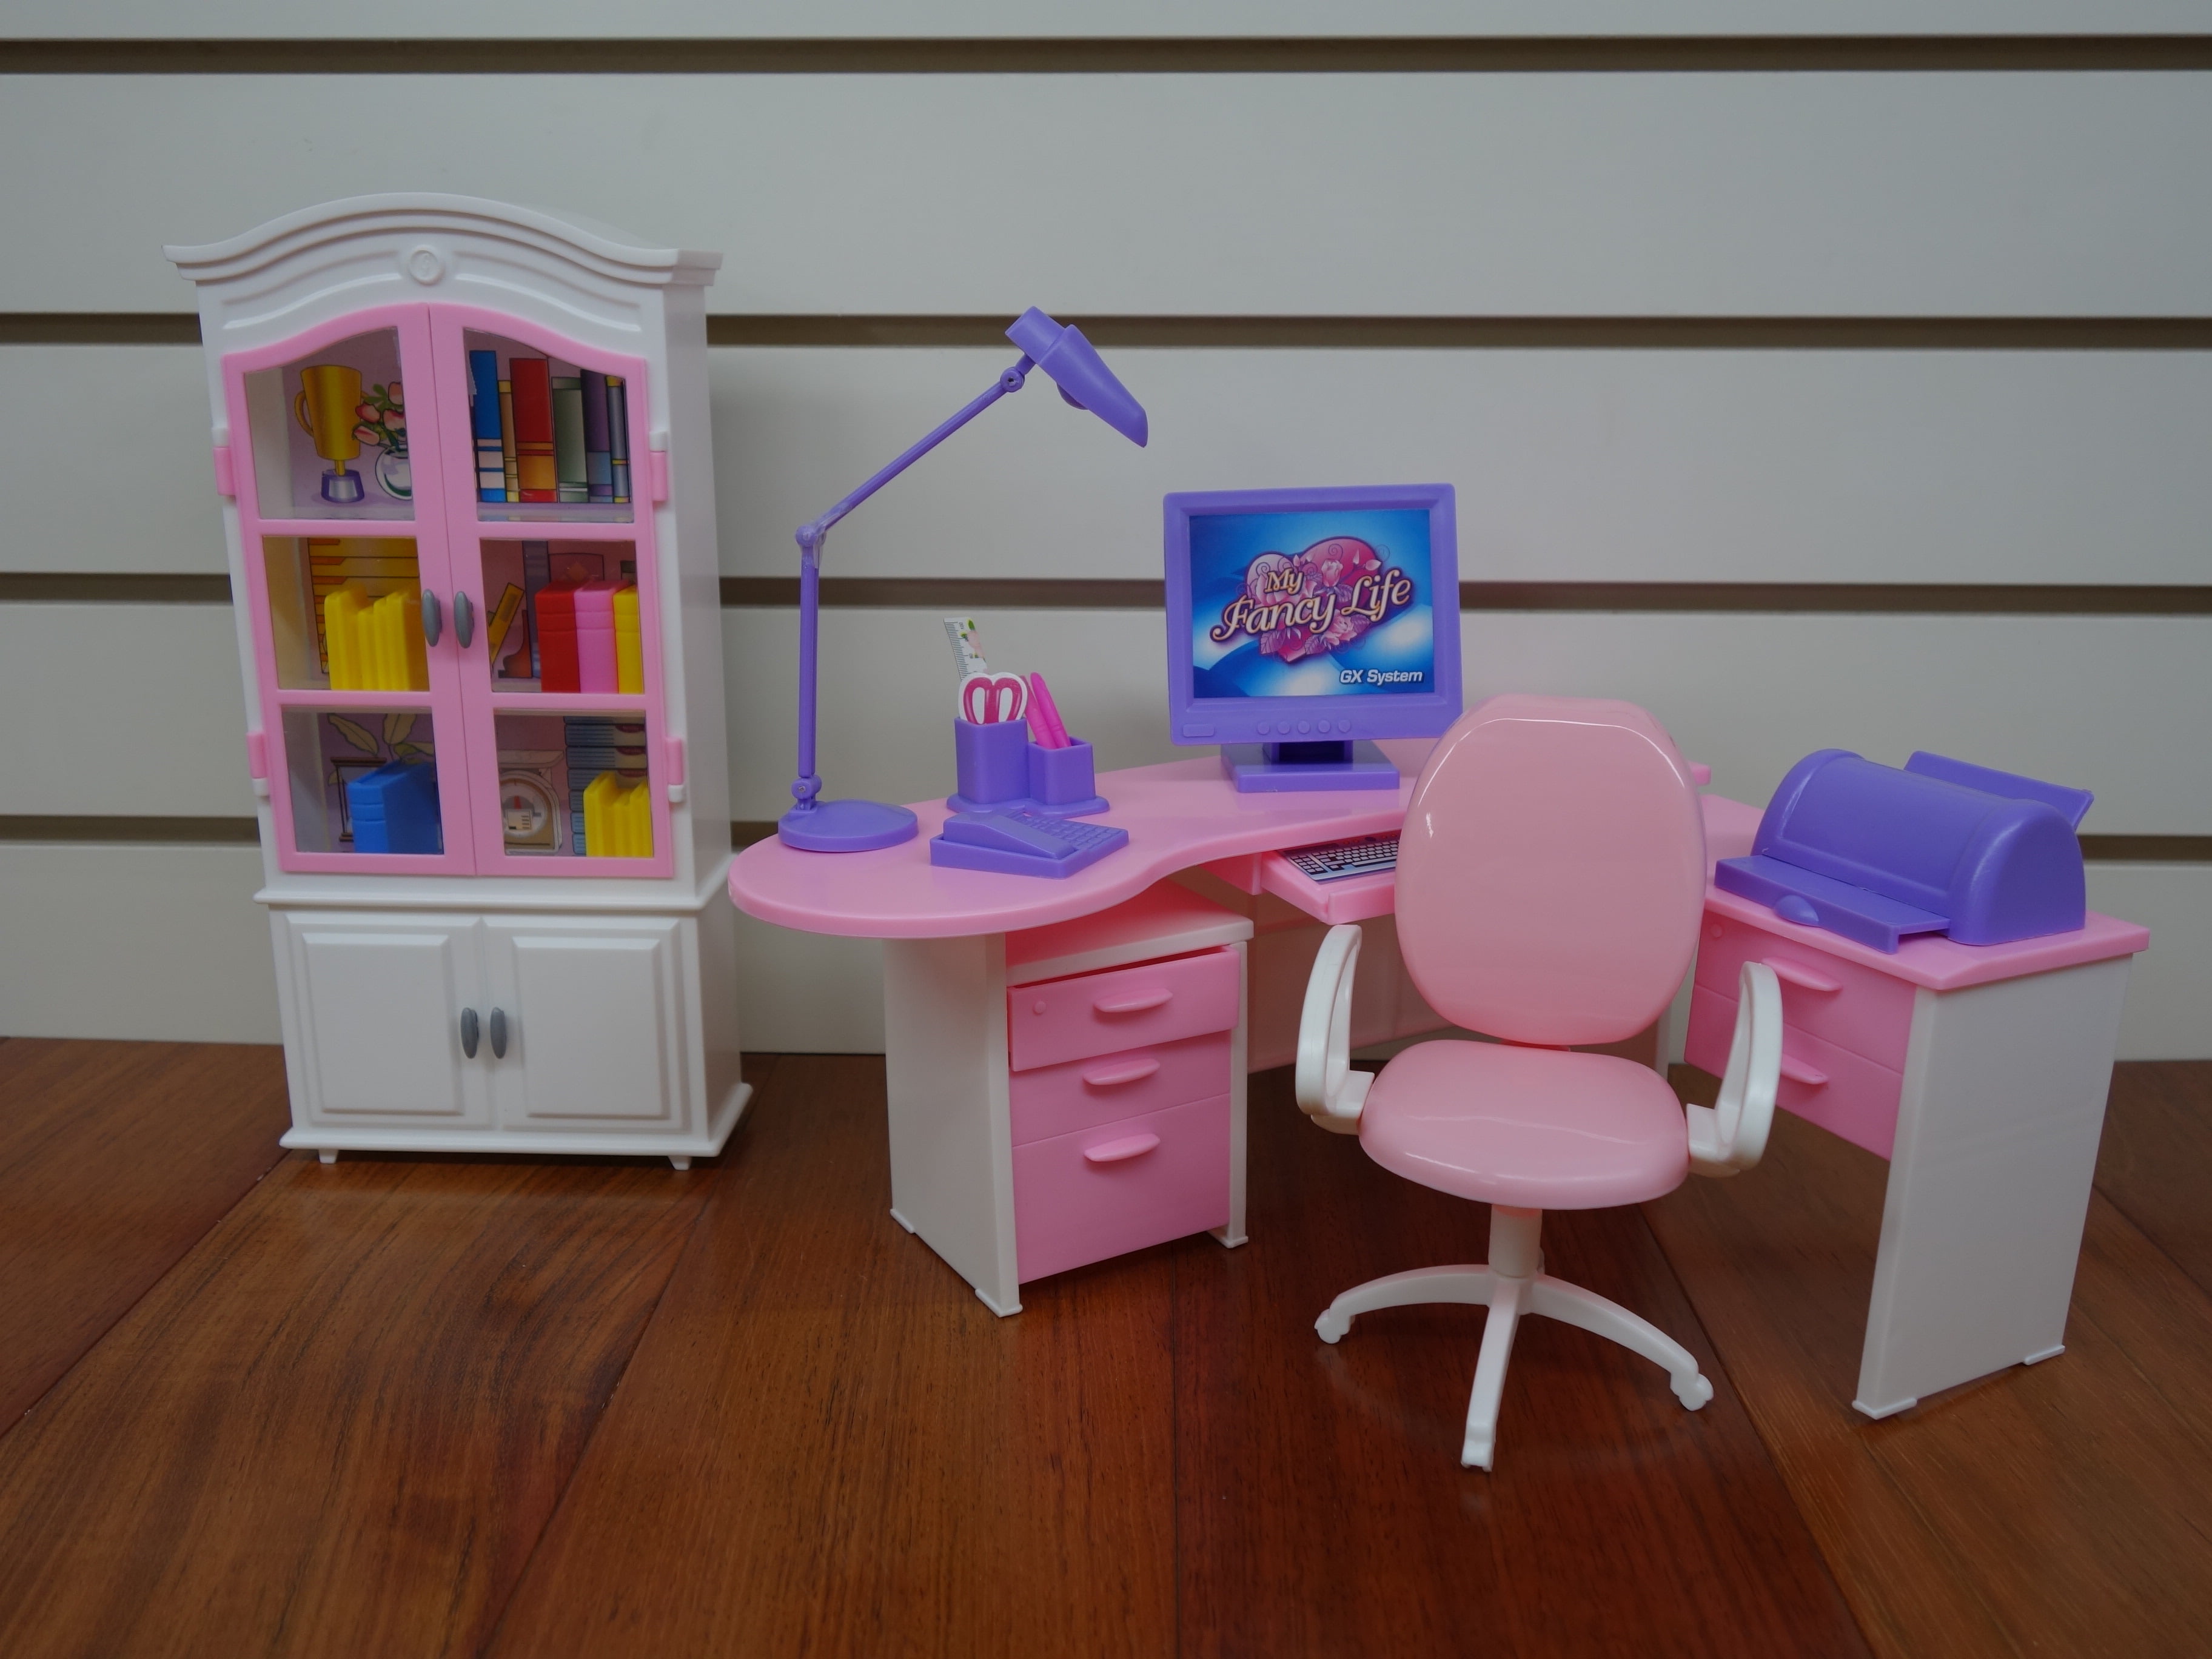 zfinding Gloria Dollhouse Furniture for Barbie Dolls Chairs Classroom W/ Desk 